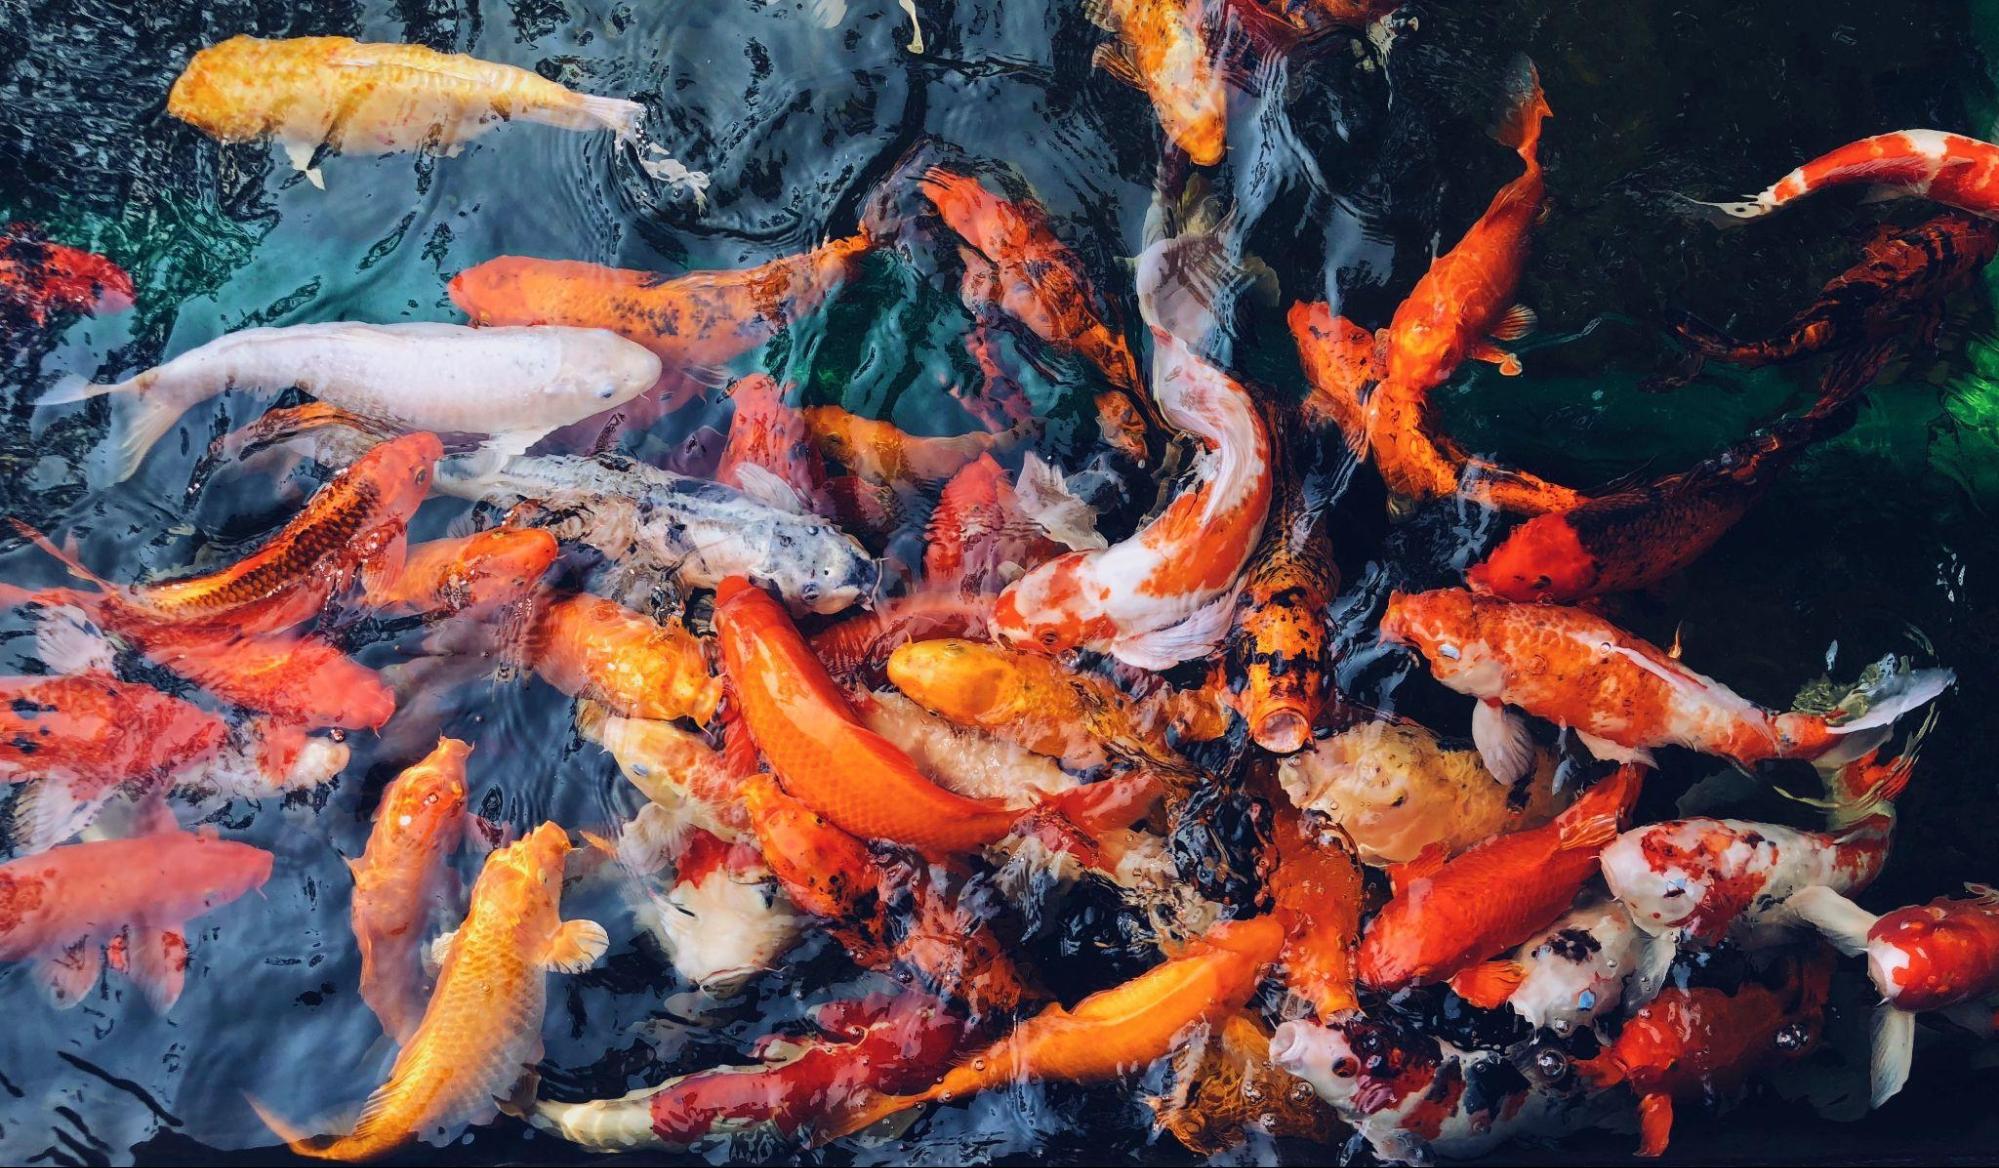 Why Are Koi Fish Often Considered an Investment?